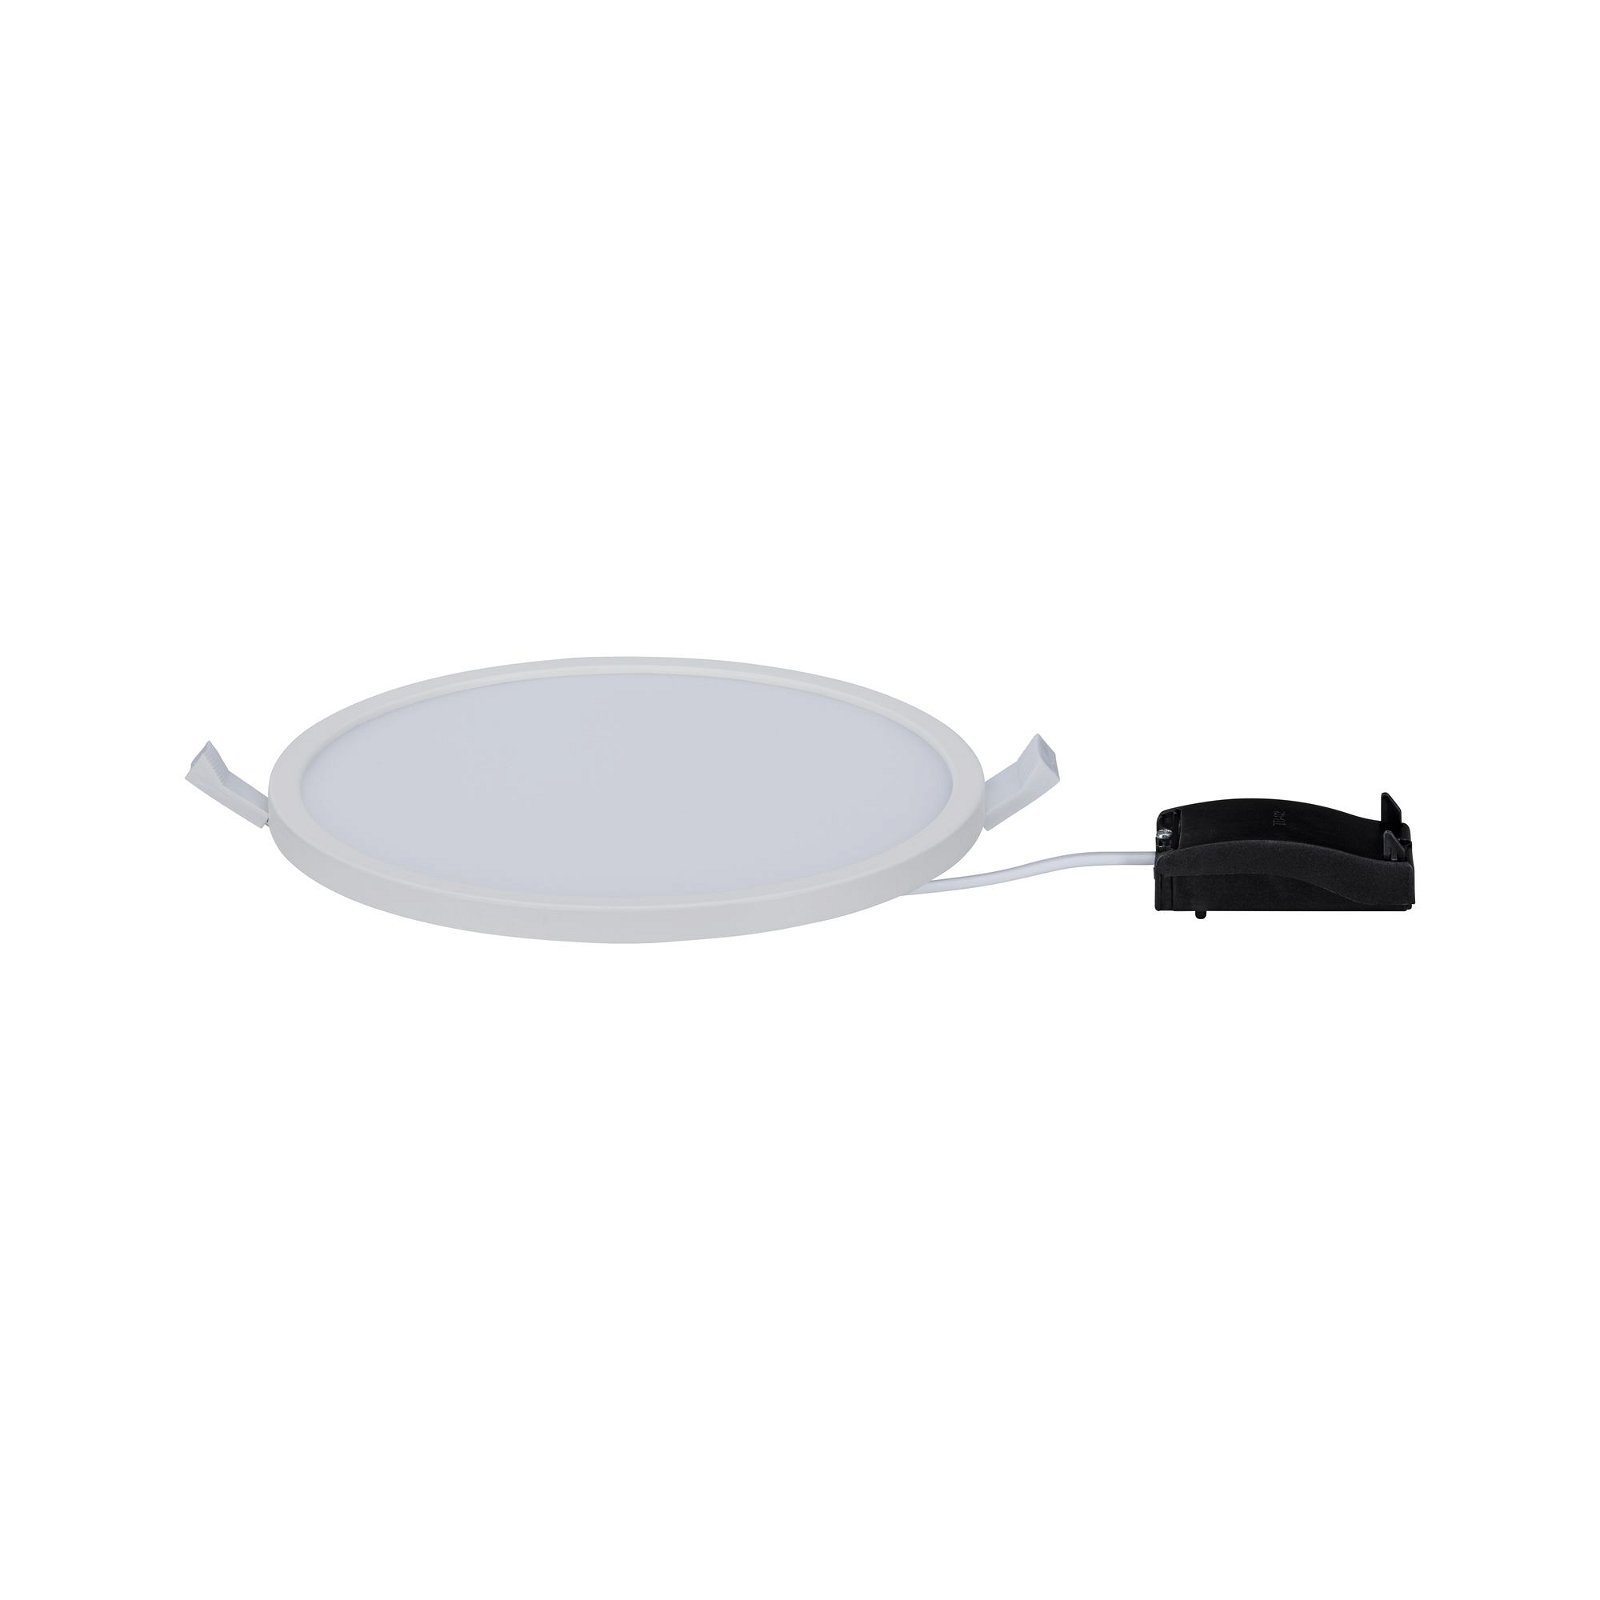 LED Recessed panel Areo IP44 round 180mm 11W 770lm 3000K Matt white dimmable